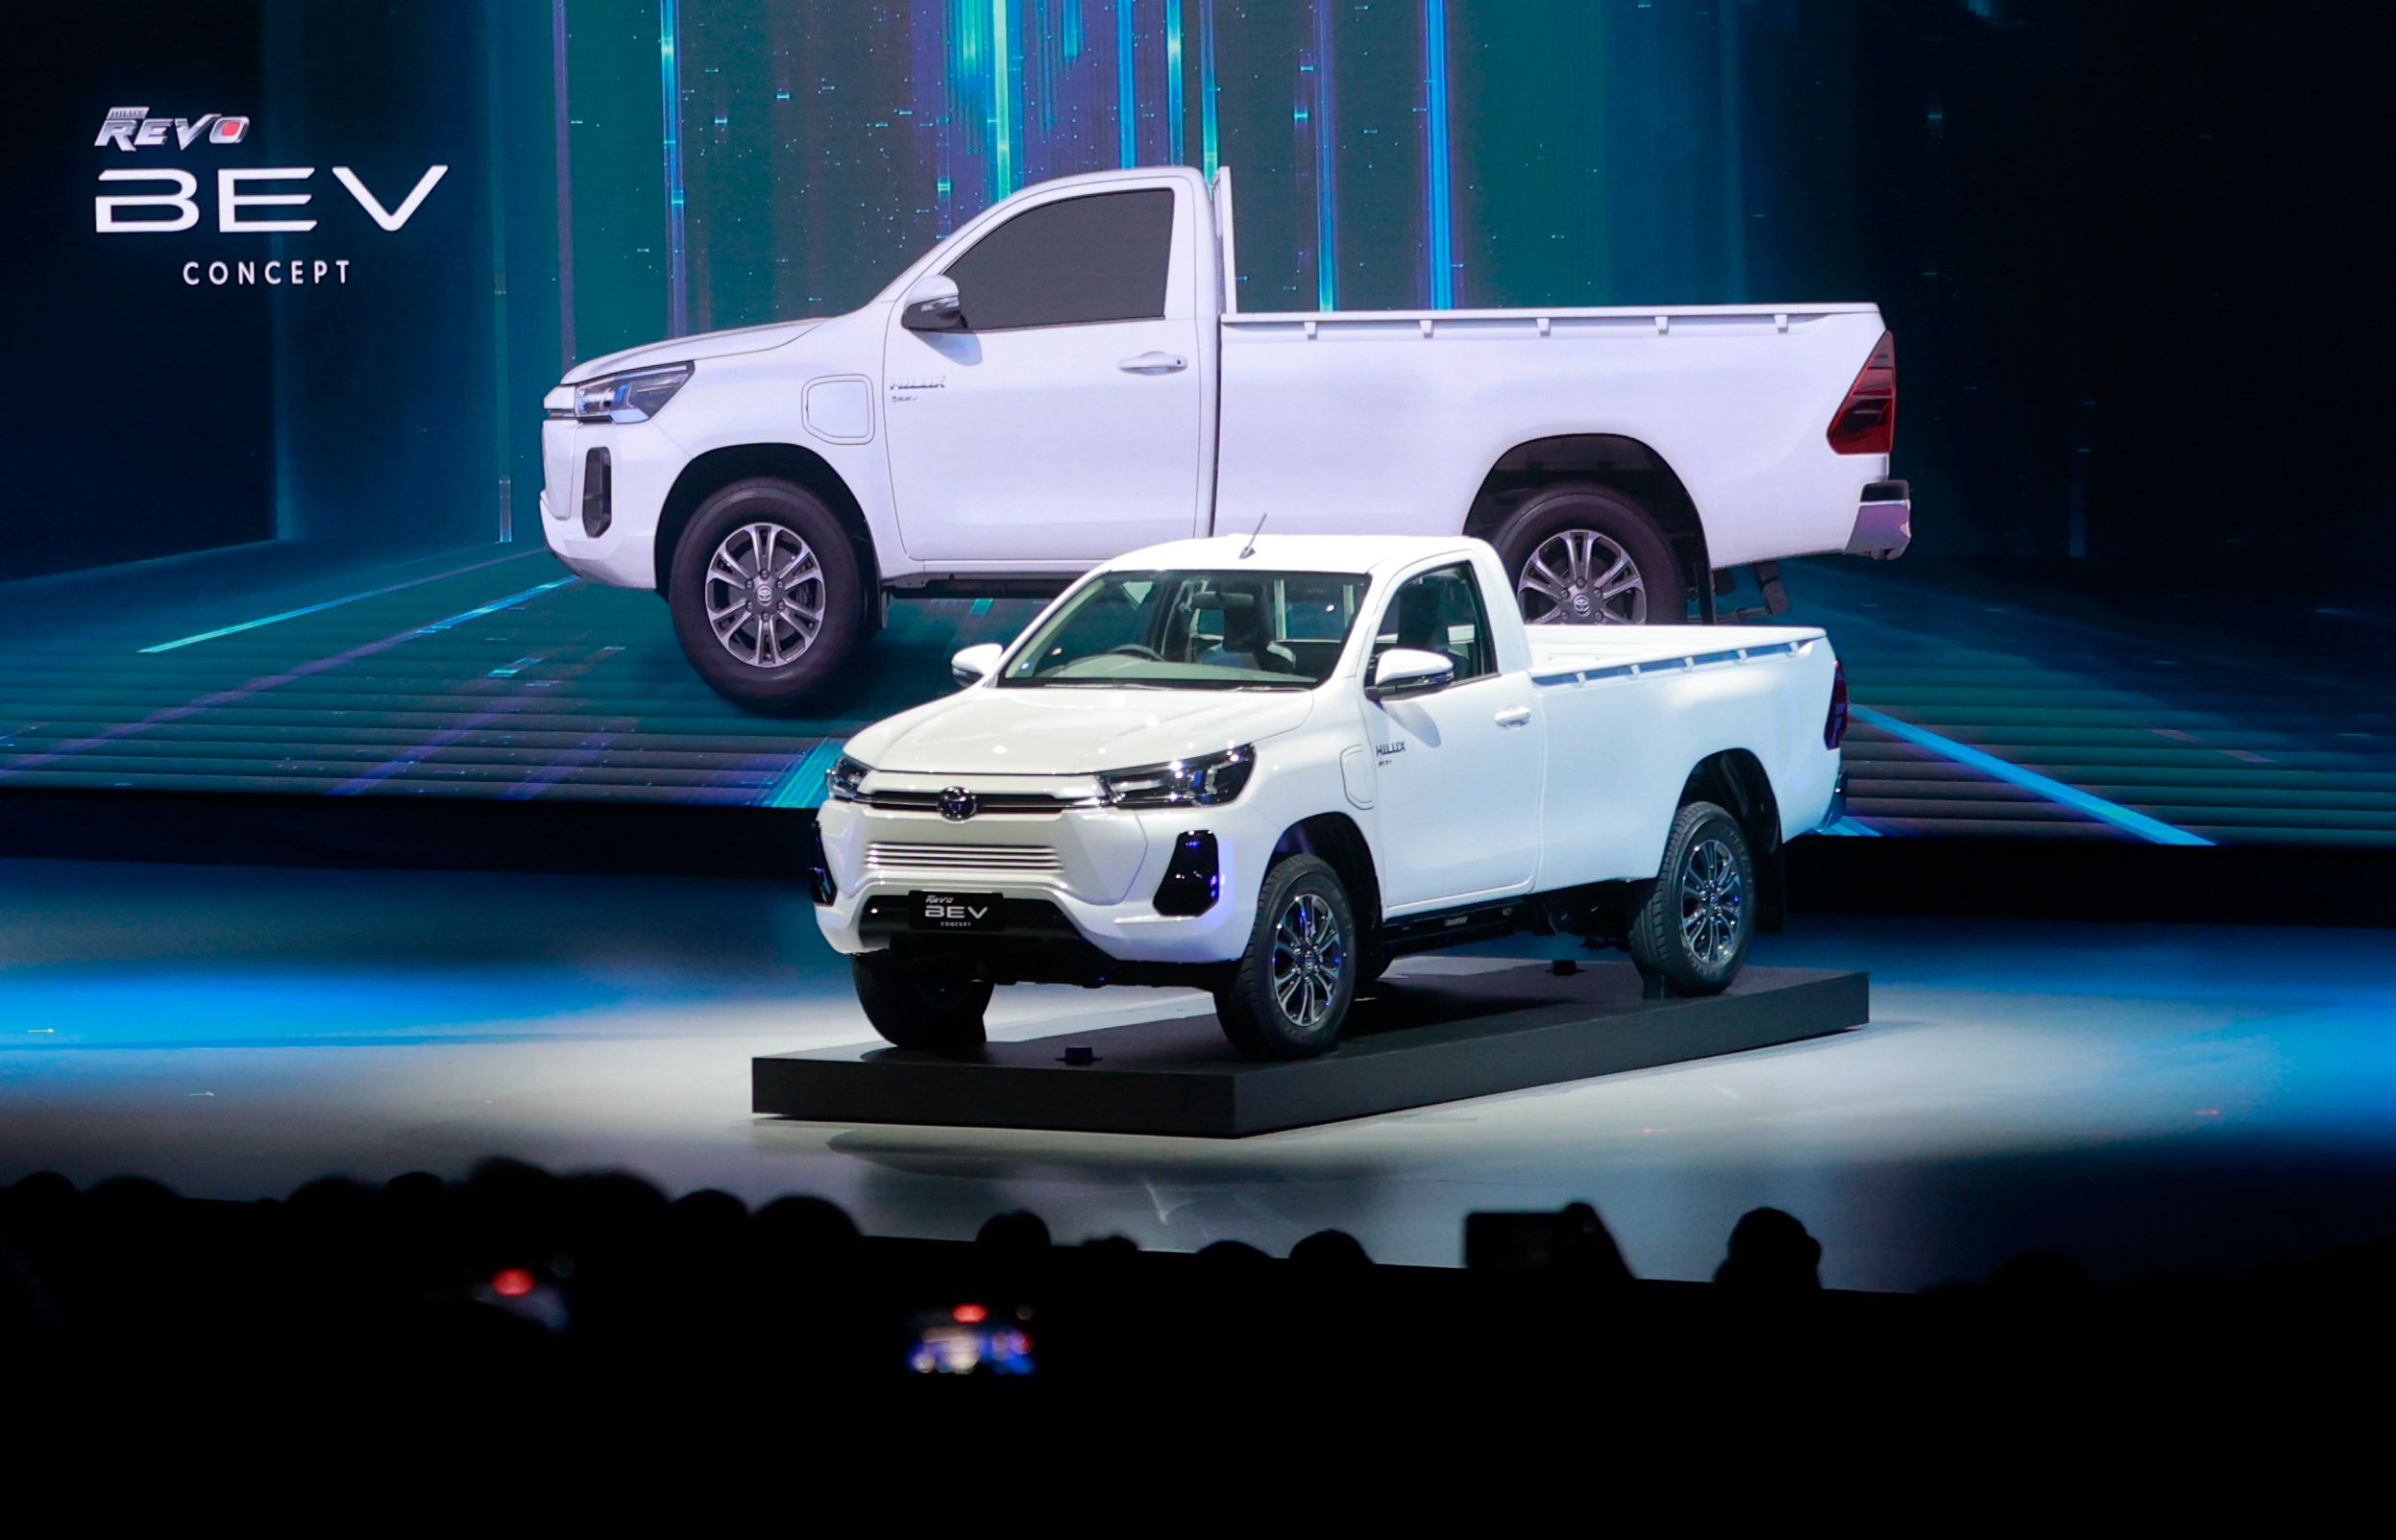 Front end of the Toyota Hilux Revo BEV Concept 